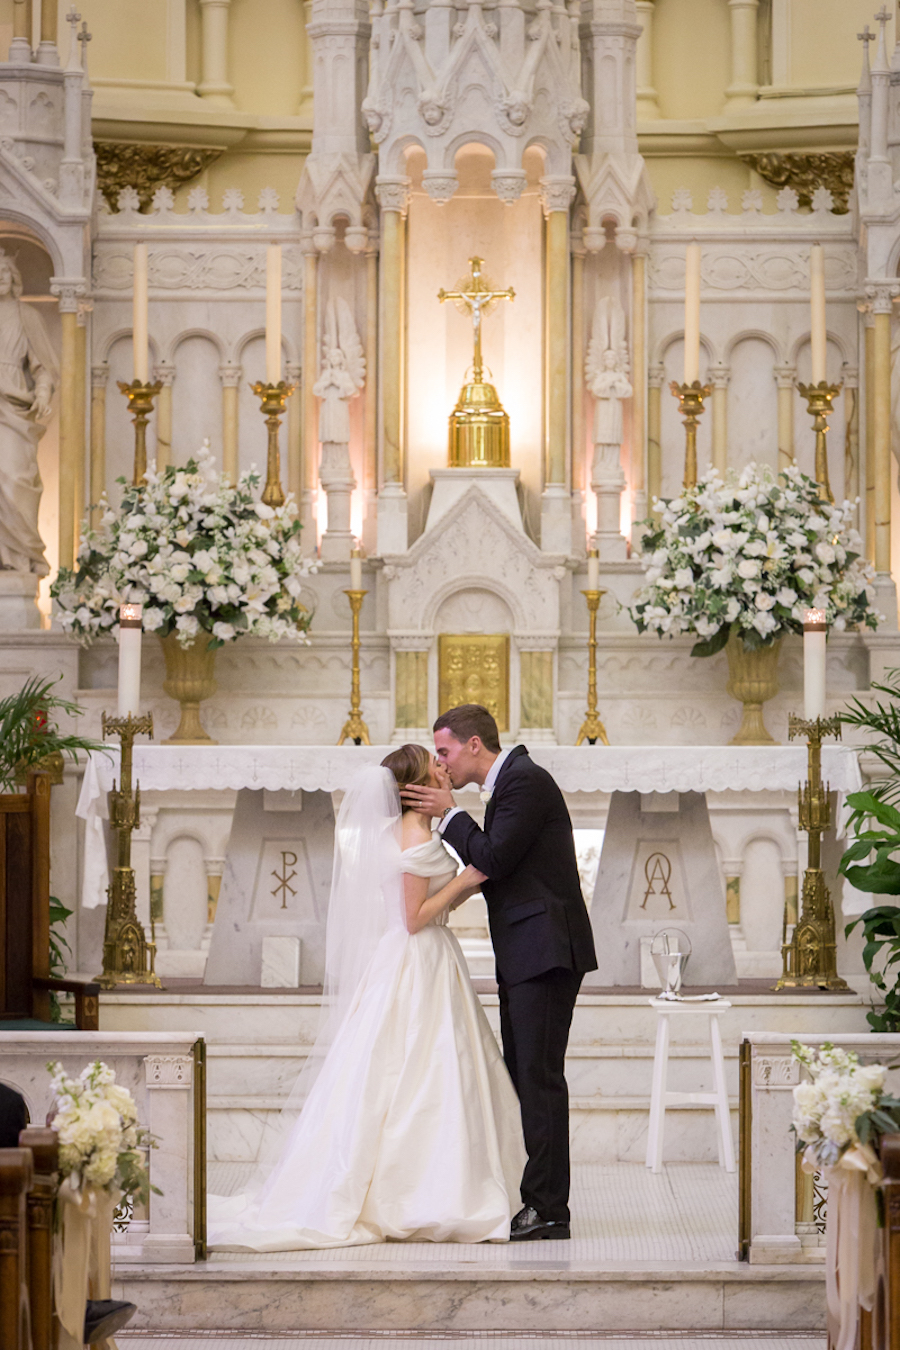 Bride and Groom First Kiss at Wedding Altar | Downtown Tampa Wedding Ceremony Venue Sacred Heart Catholic Church